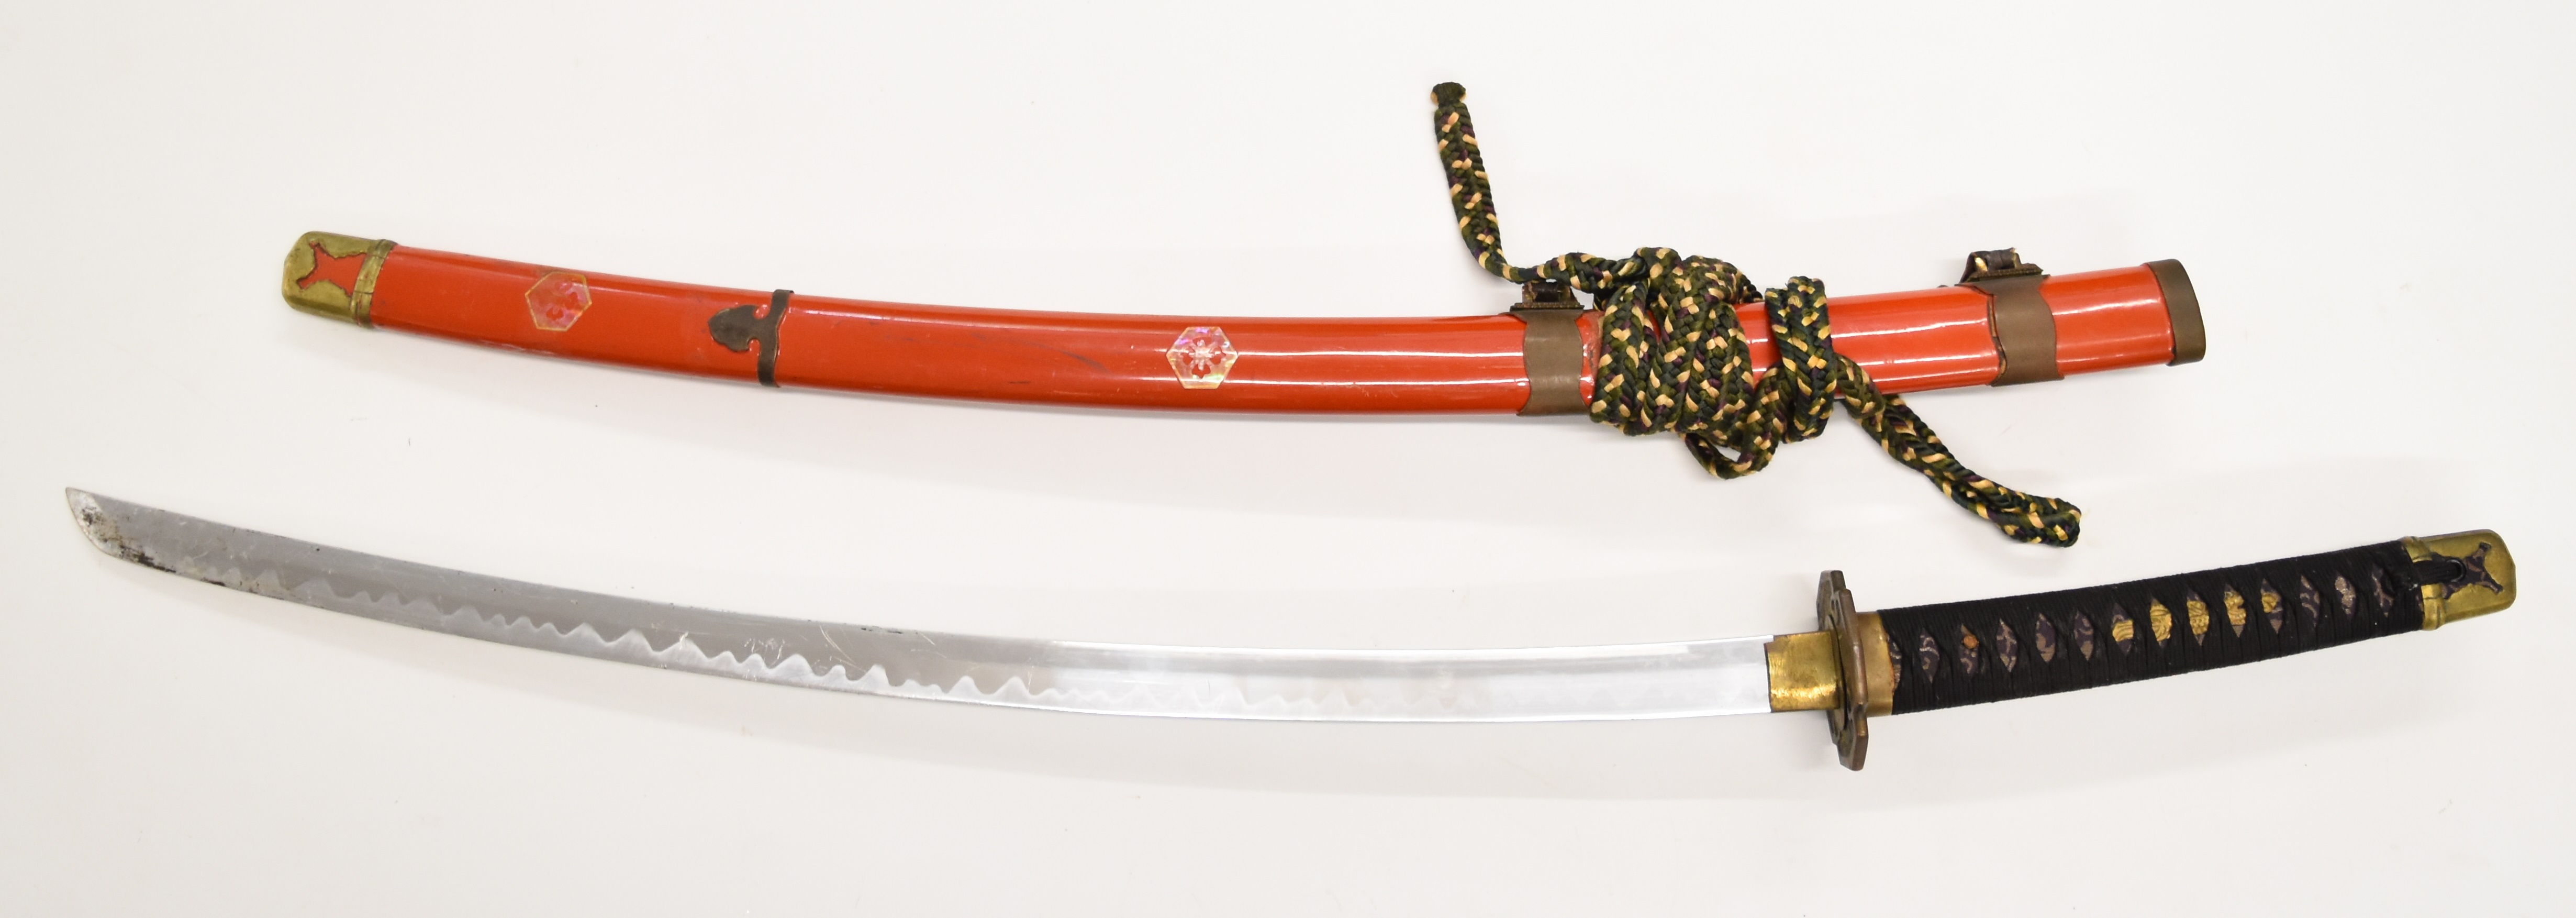 Modern Samurai sword with bound handle, 65cm curved blade, scabbard and carry cord. PLEASE NOTE - Image 2 of 10